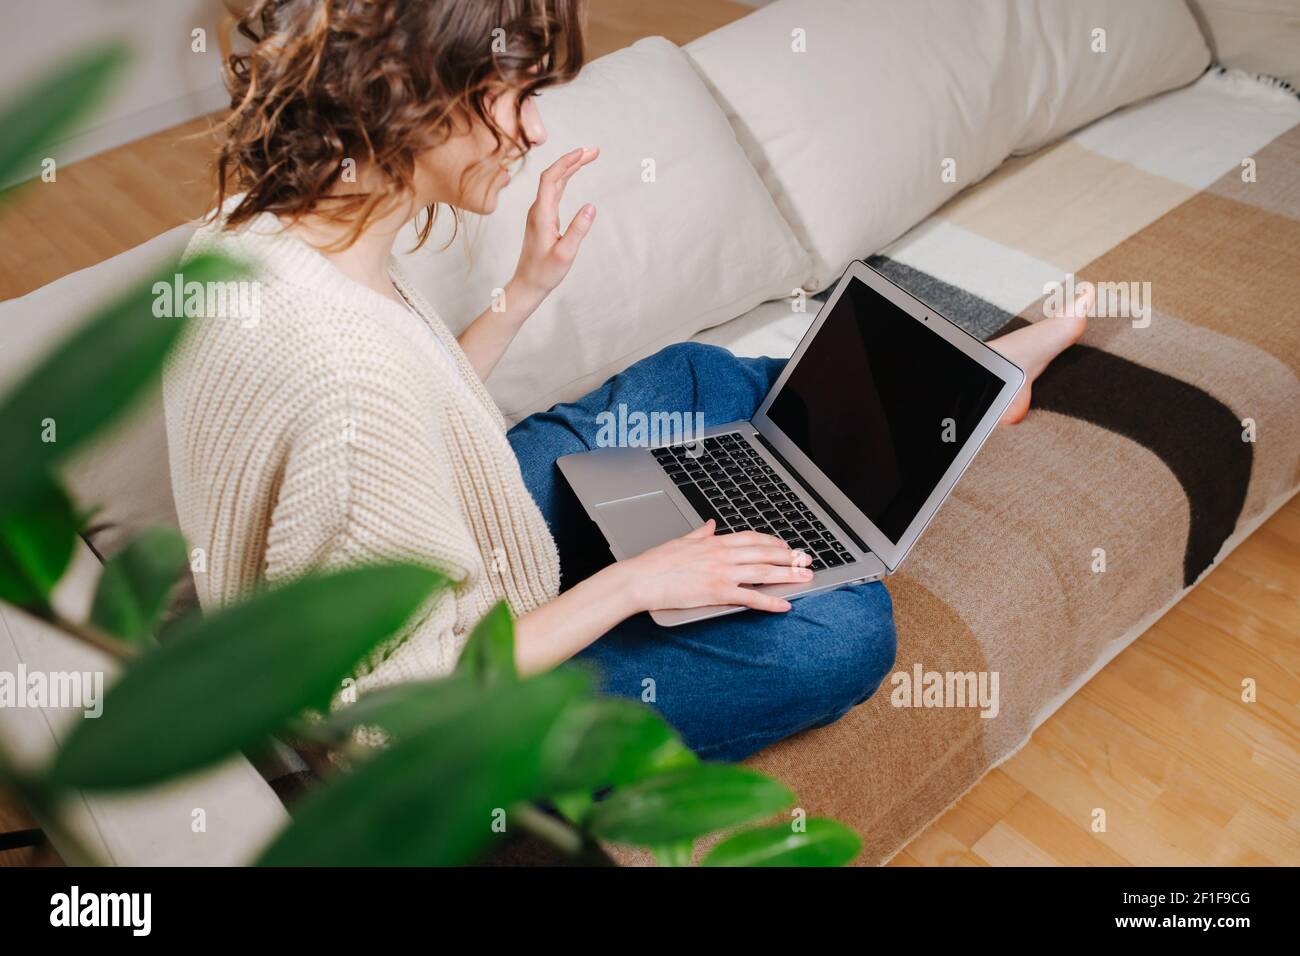 Chatty young woman watching a laptop in comforts of her apartment. She's sitting on a couch talking to someone via webcam. Side view, at an angle. Stock Photo